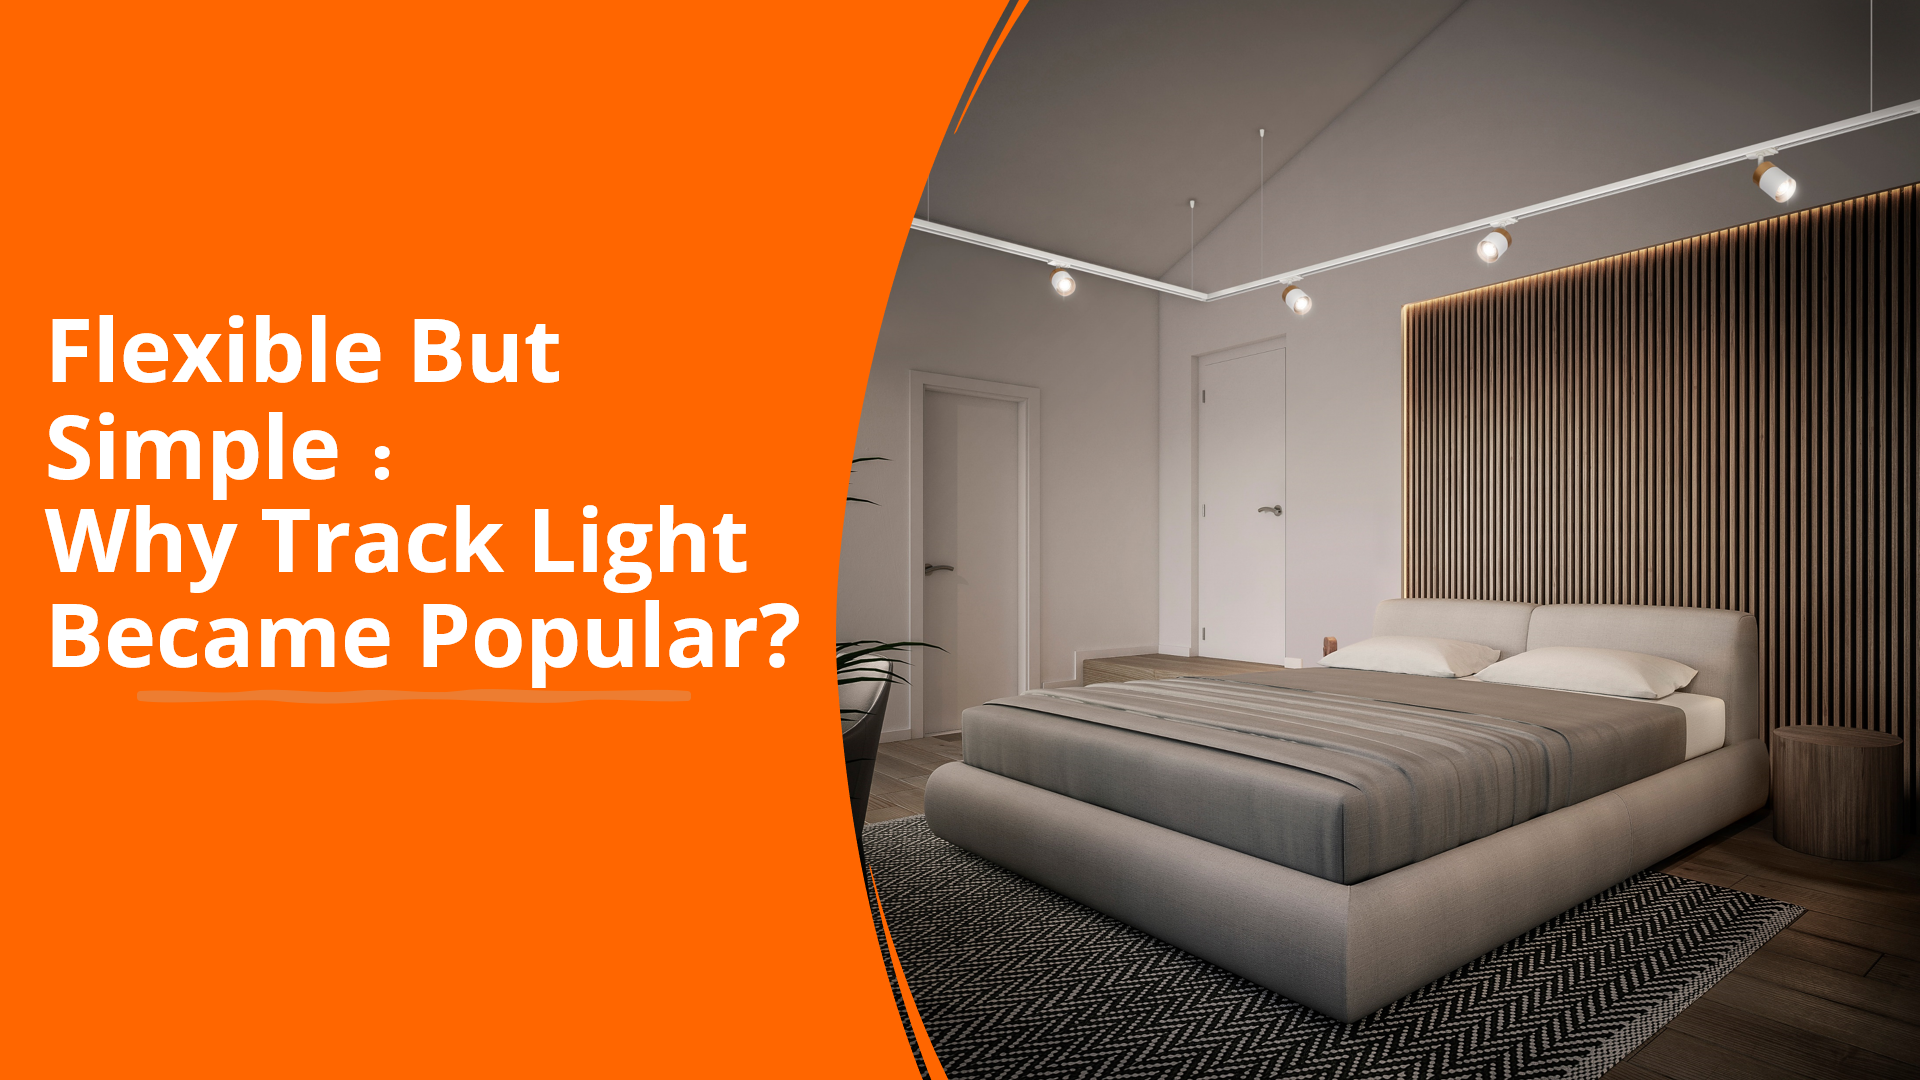 Flexible But Simple: Why Track Light Became Popular?